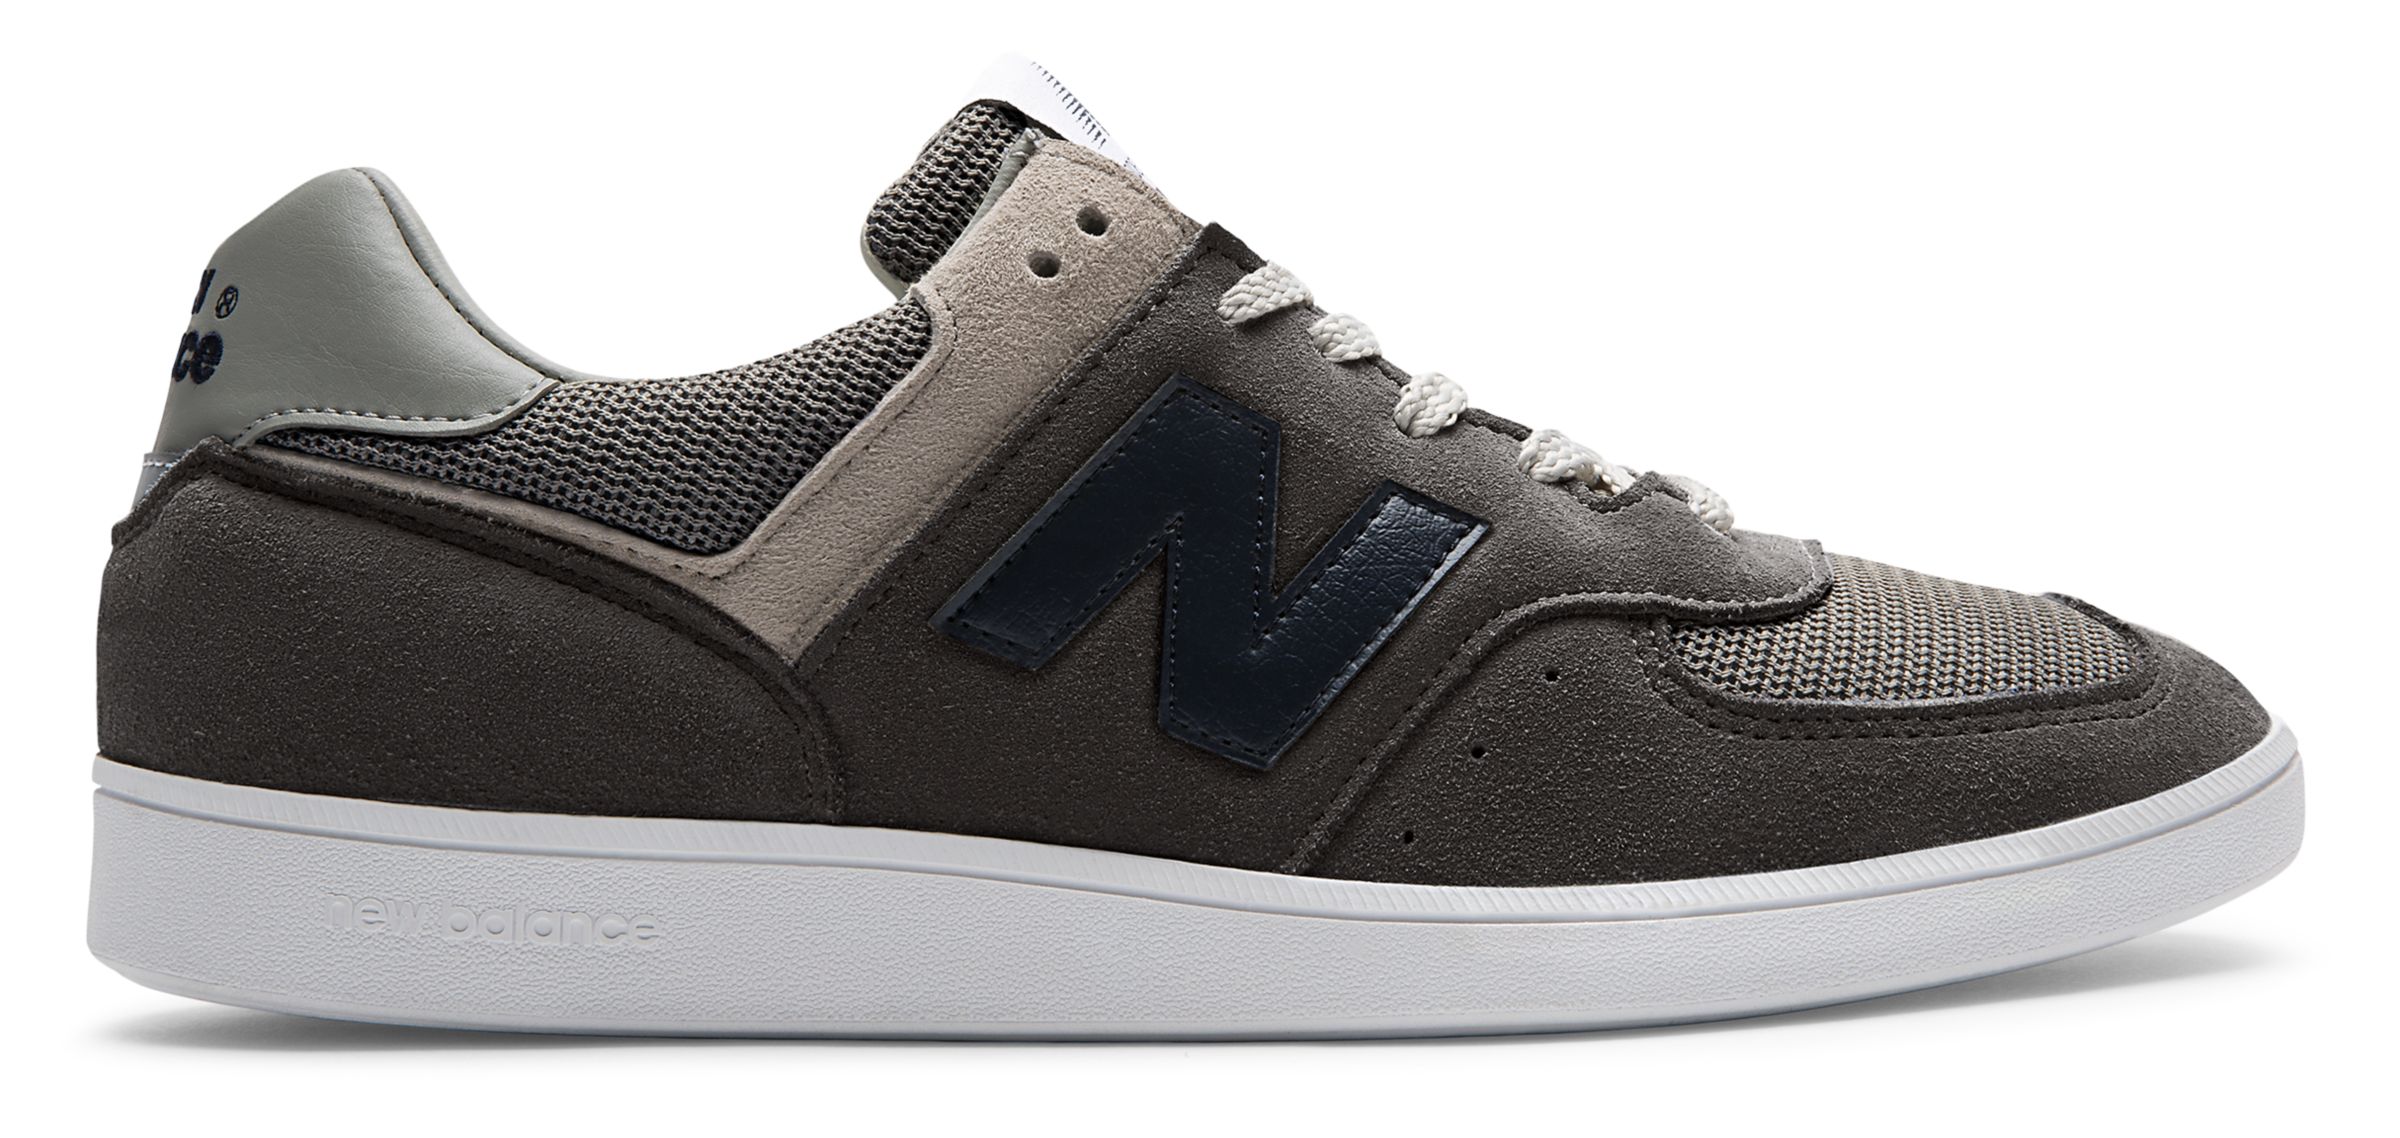 CT576 Made in UK - Men's 576 - Classic, - New Balance